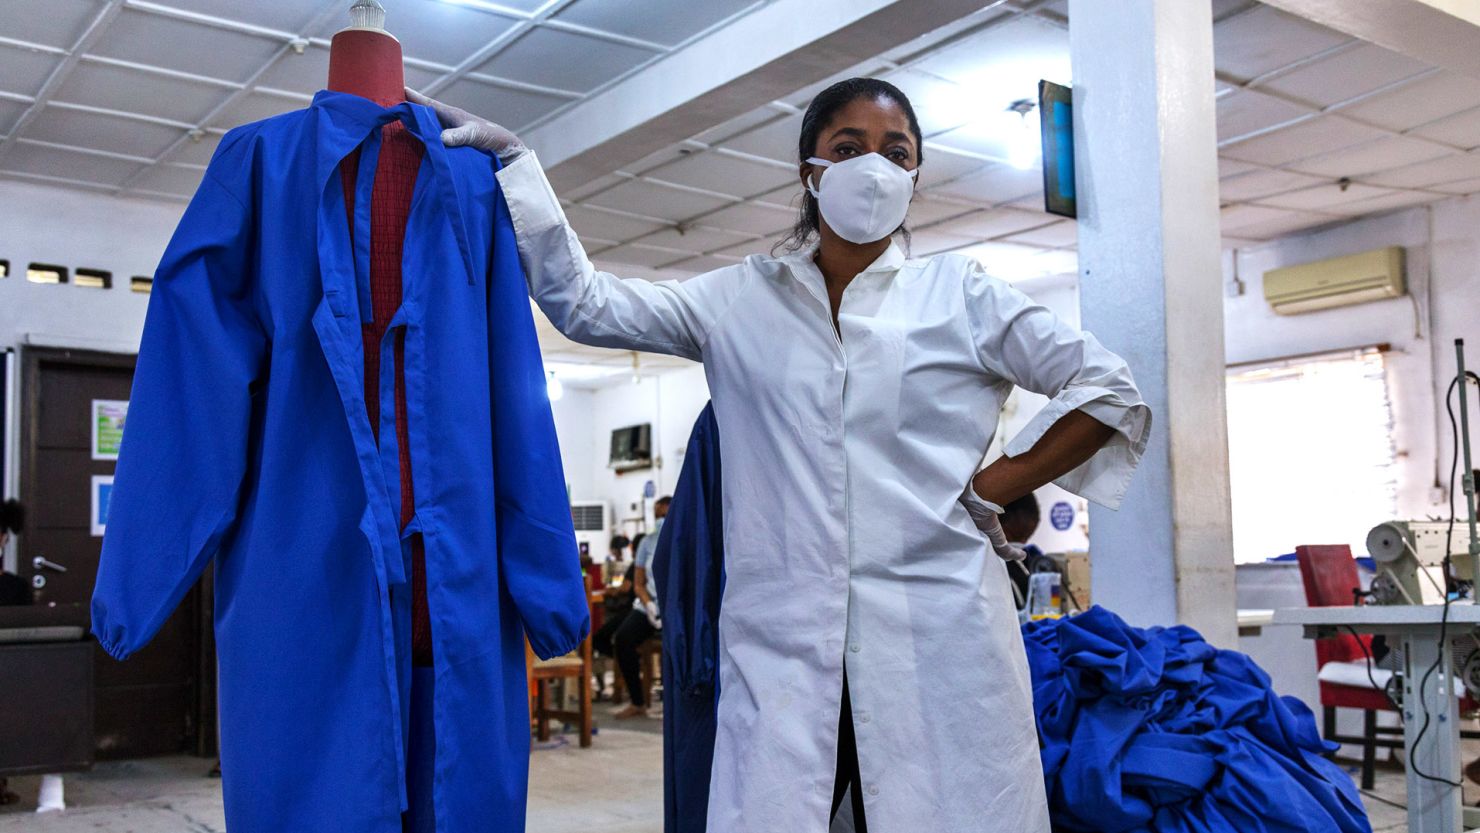 Fashion designer Folake Akindele Coker switched to producing PPE to keep her factory open.